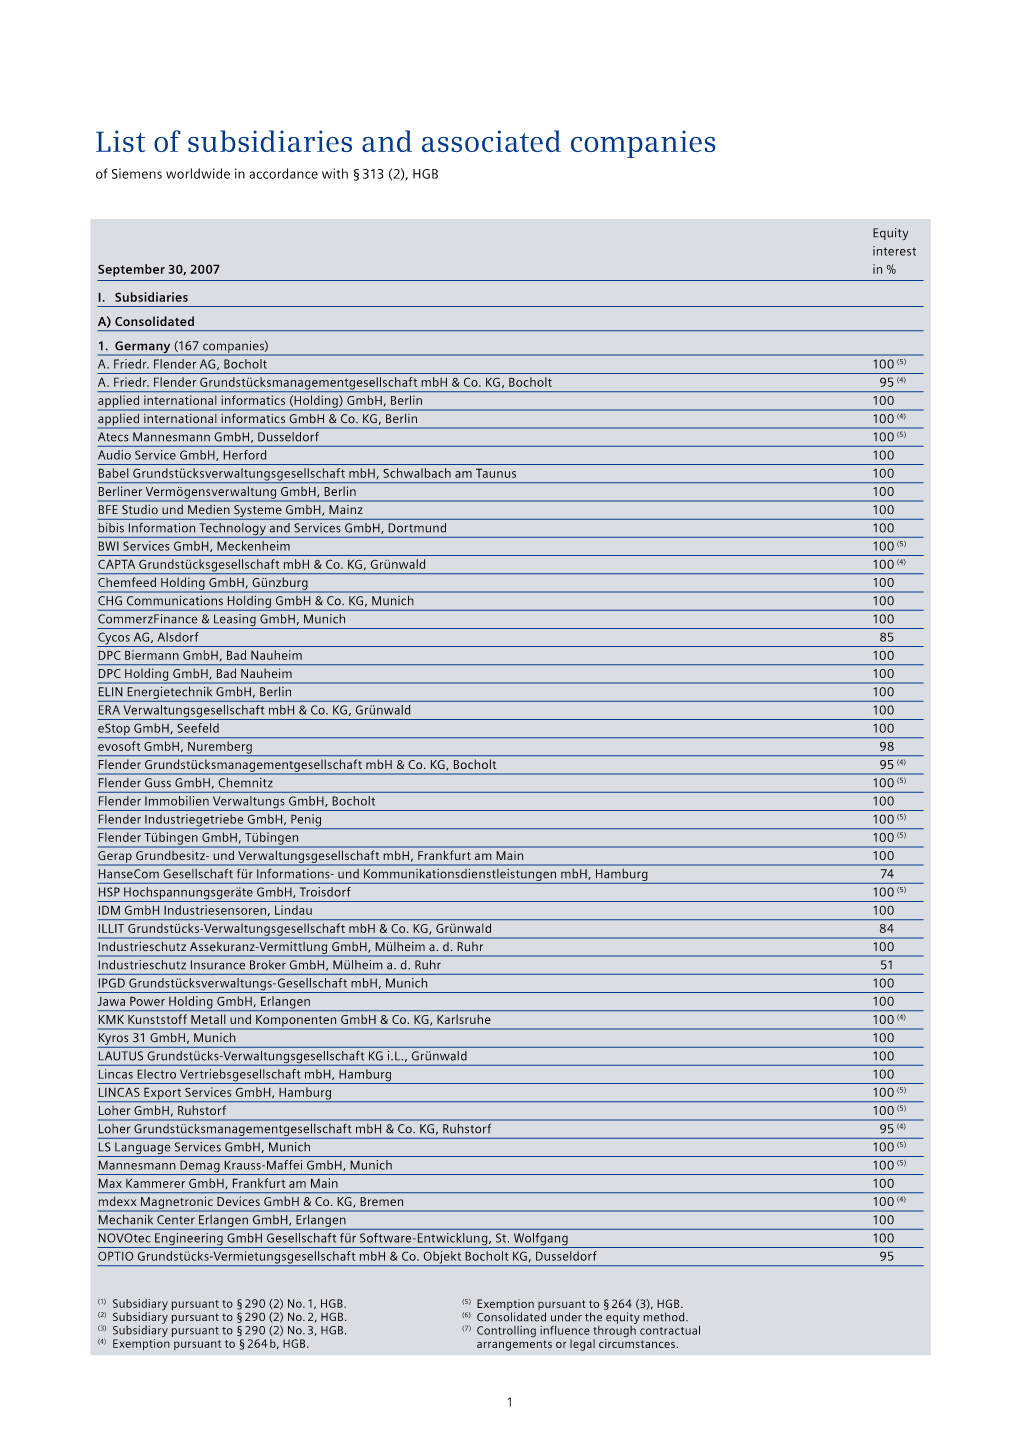 List of Subsidiaries and Associated Companies of Siemens Worldwide in Accordance with § 313 (2), HGB